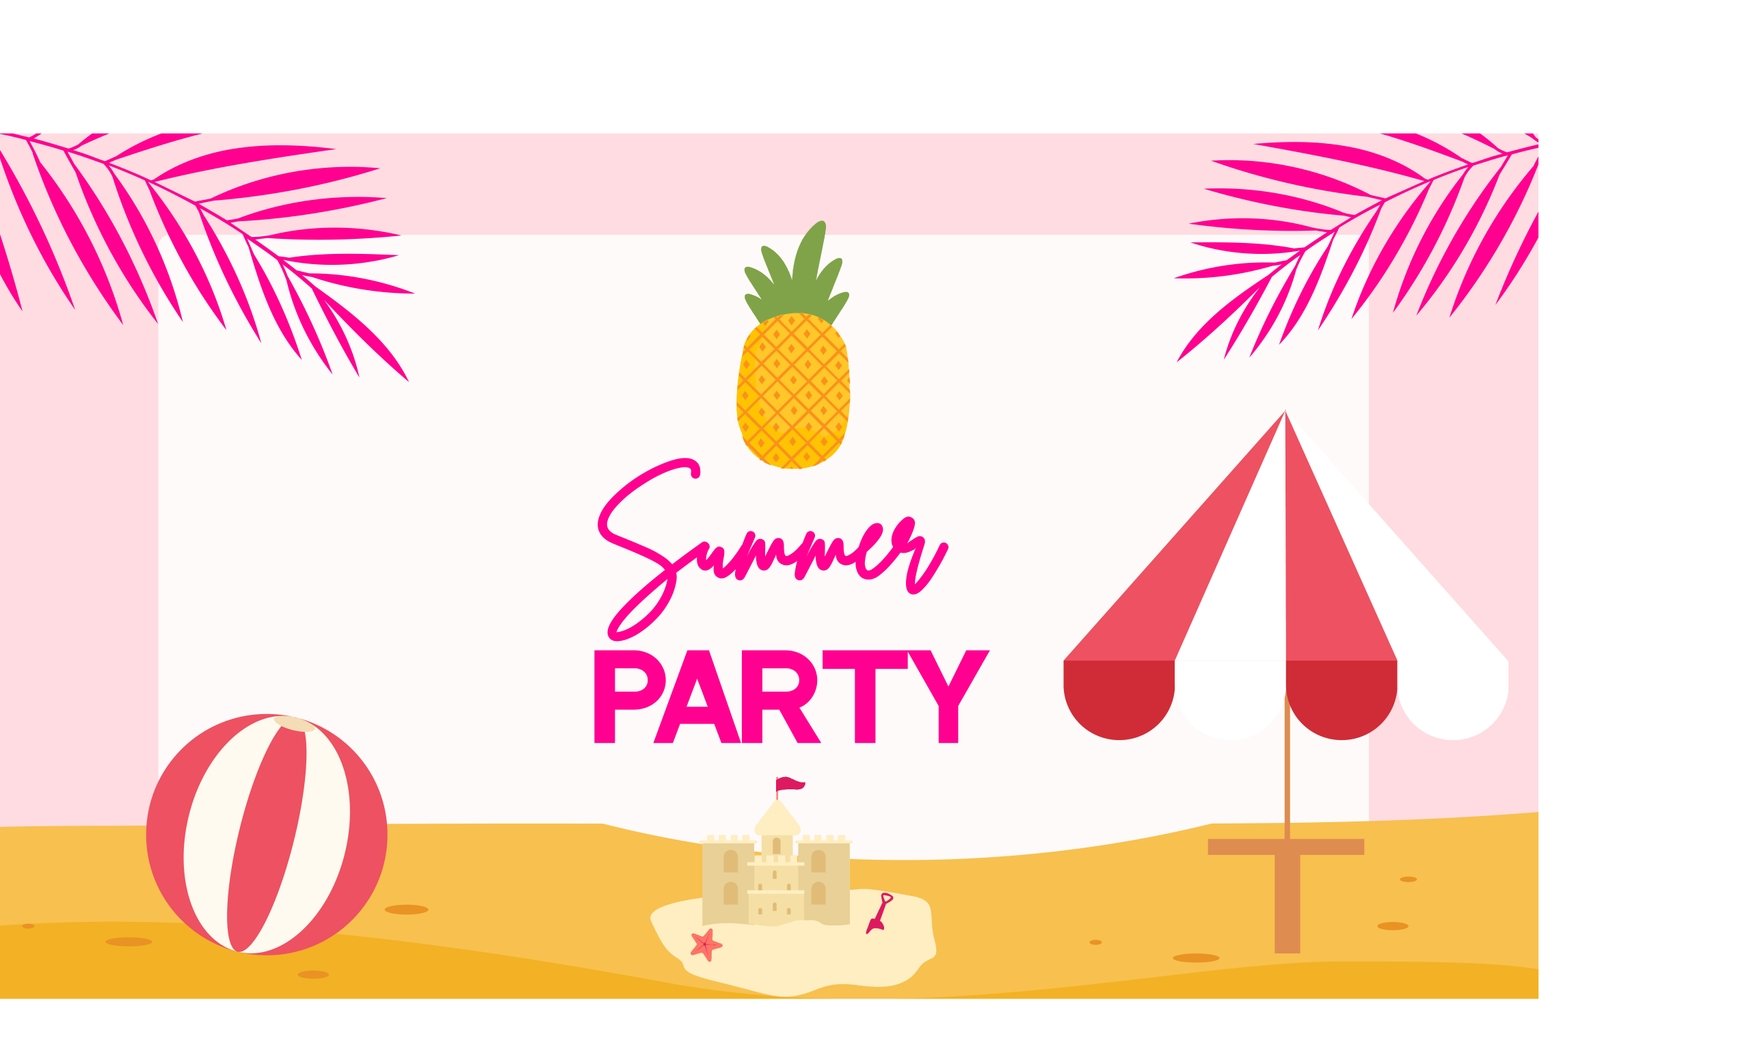 Summer Party Invitation Background